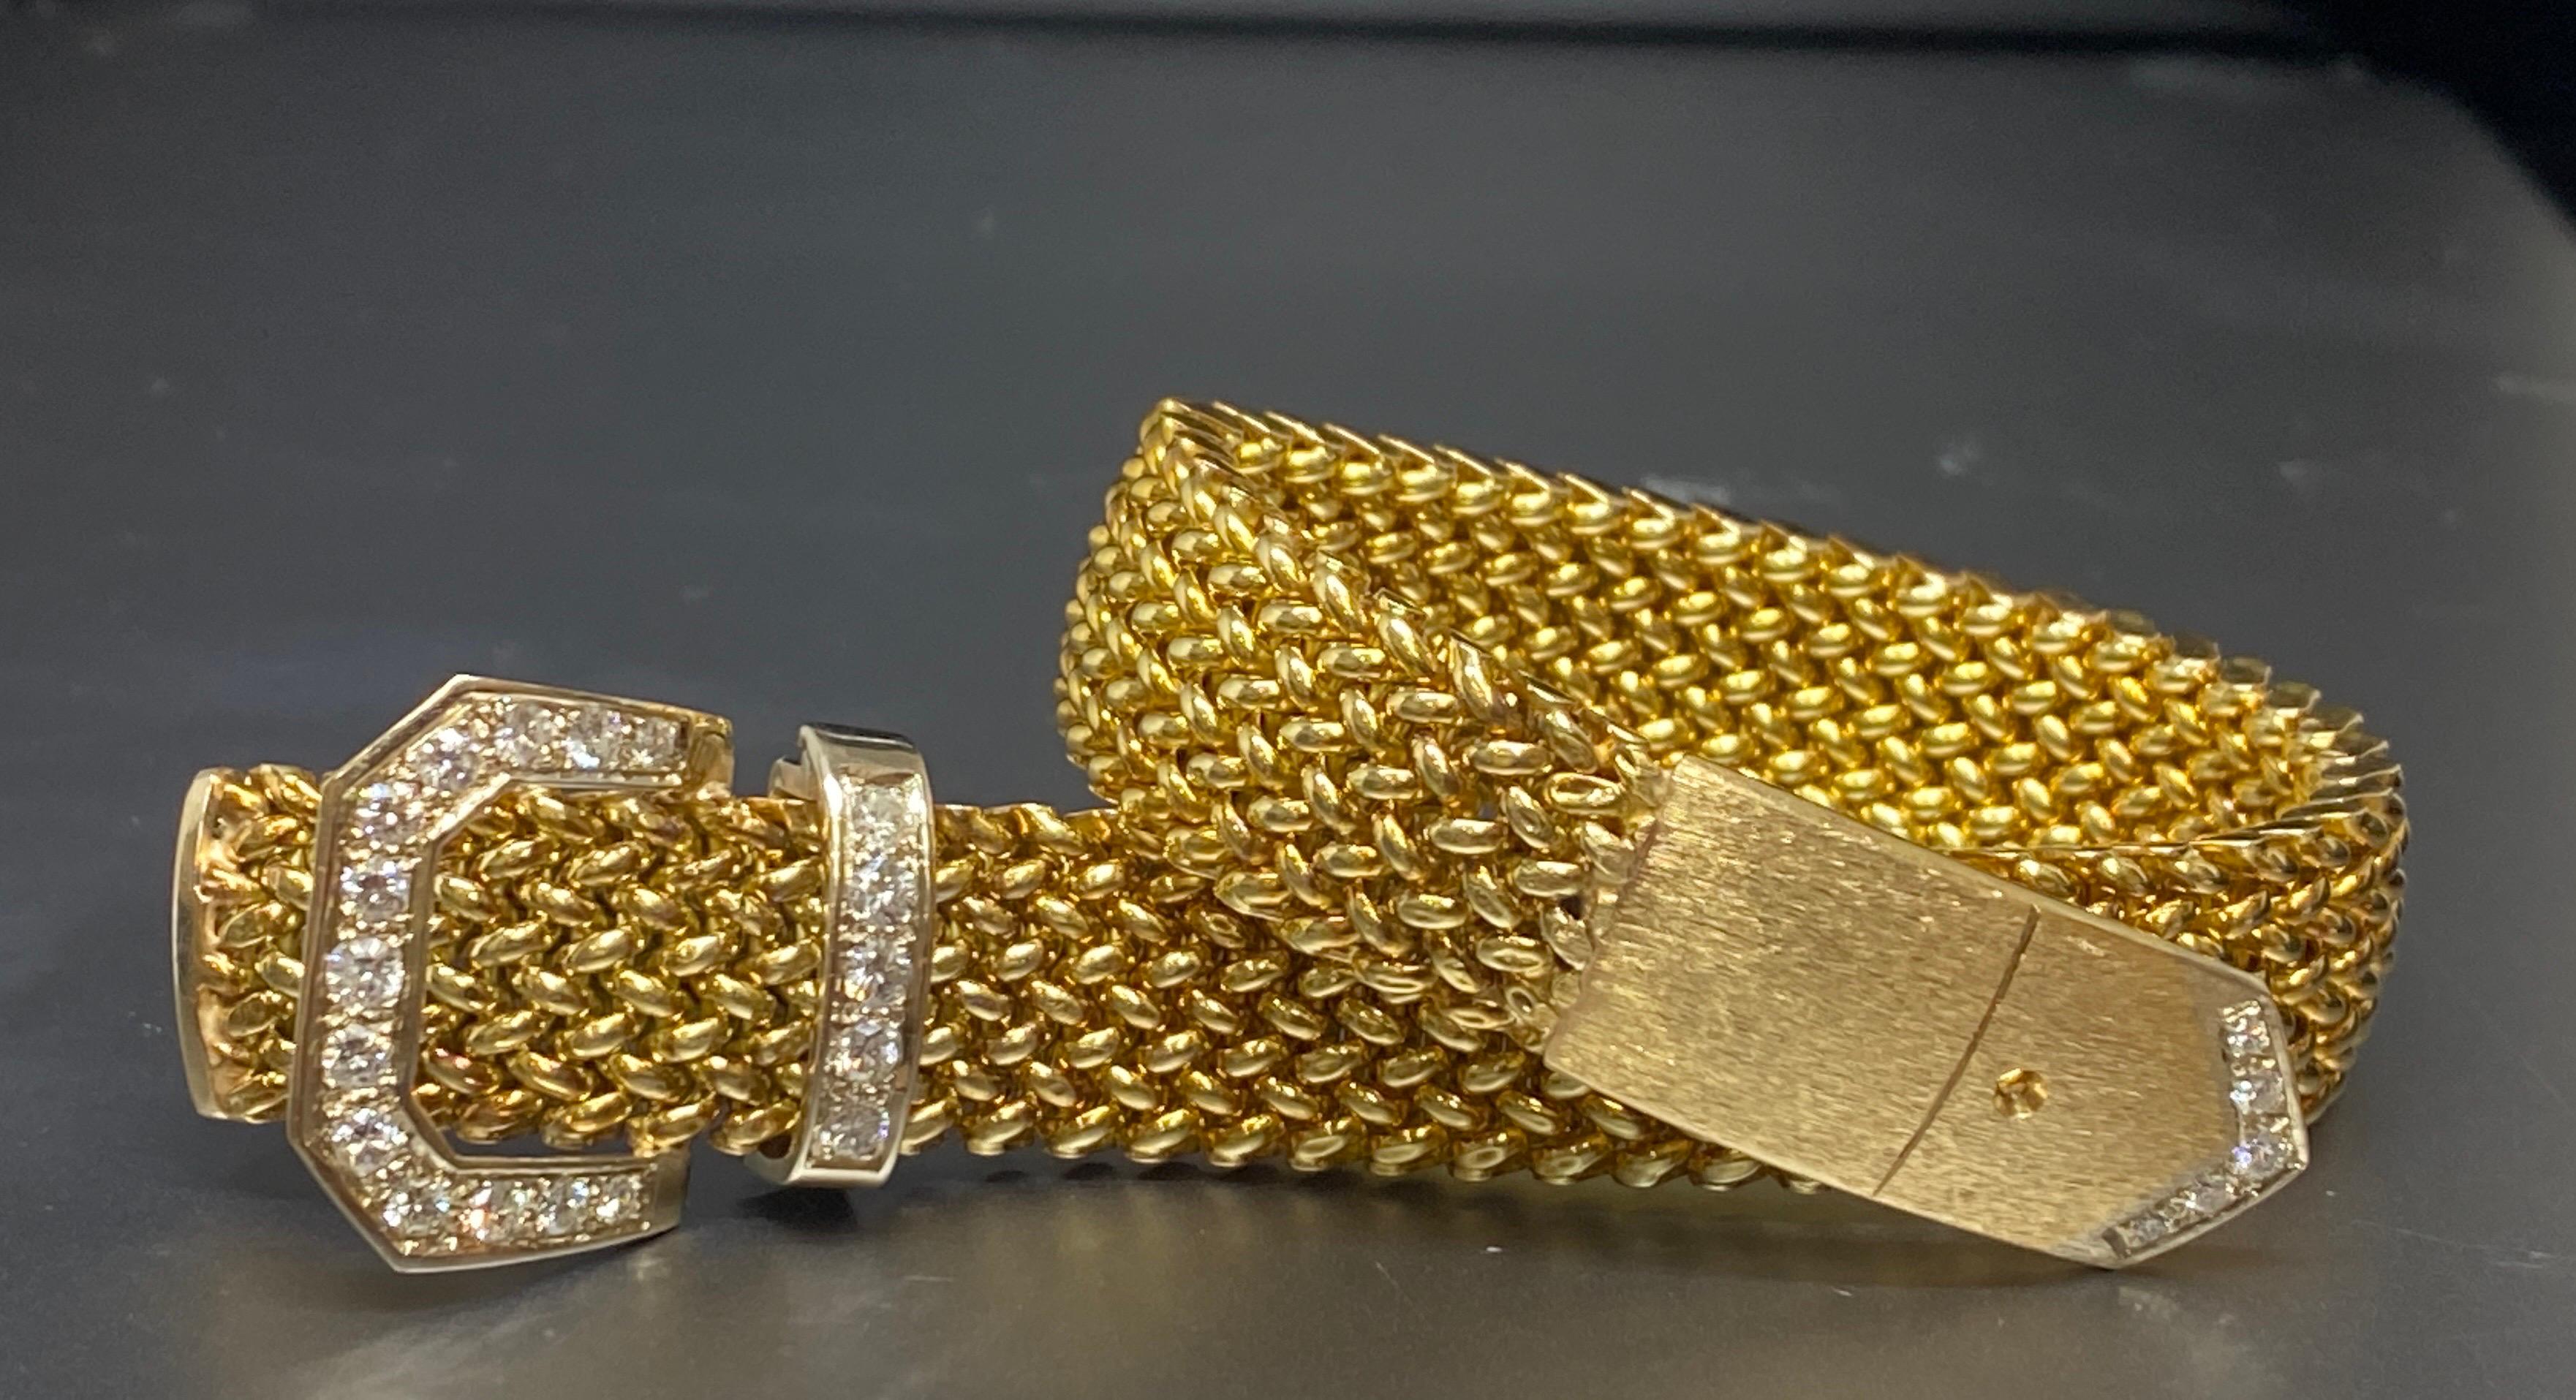 Up for your consideration is this stunning vintage 14 karat yellow gold diamond woven mesh buckle bracelet. This classic buckle bracelet features a yellow gold woven link bracelet band with a florentine finished end. The buckle clasp, keeper and tip